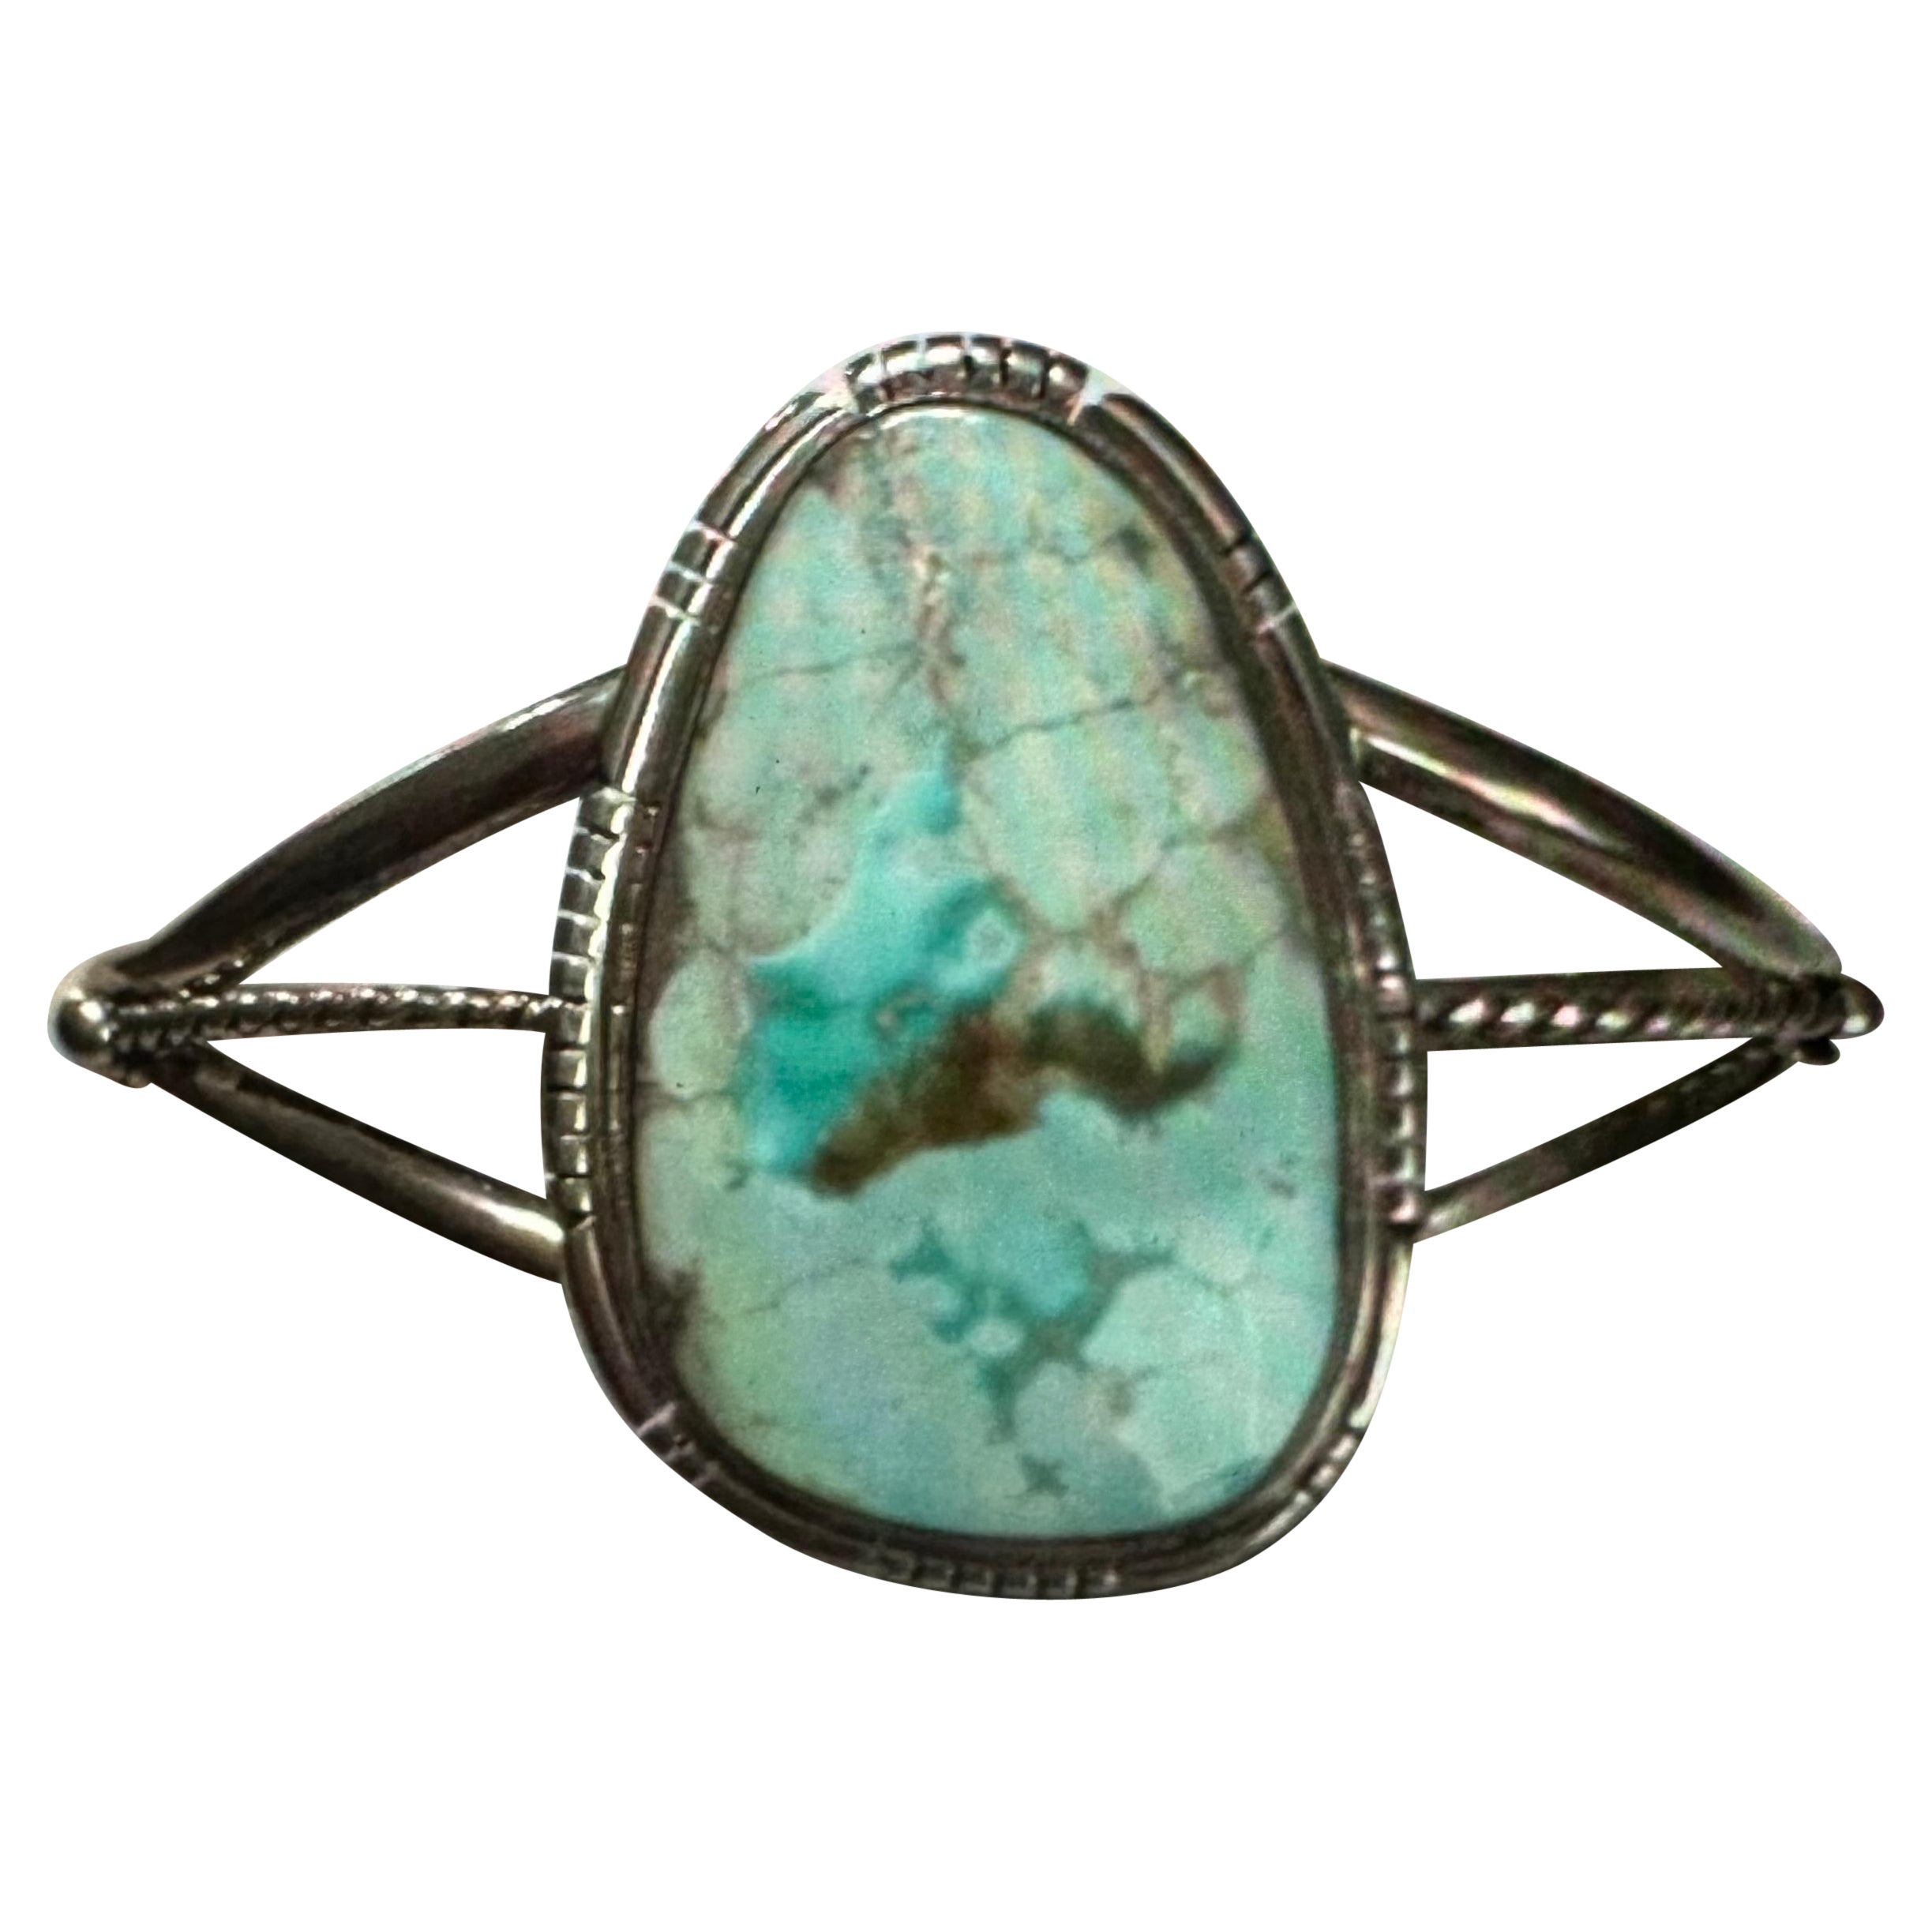 Sterling Silver .925 1"x 1 1/2" Kingman Turquoise Cuff Bracelet by Dave Skeets For Sale